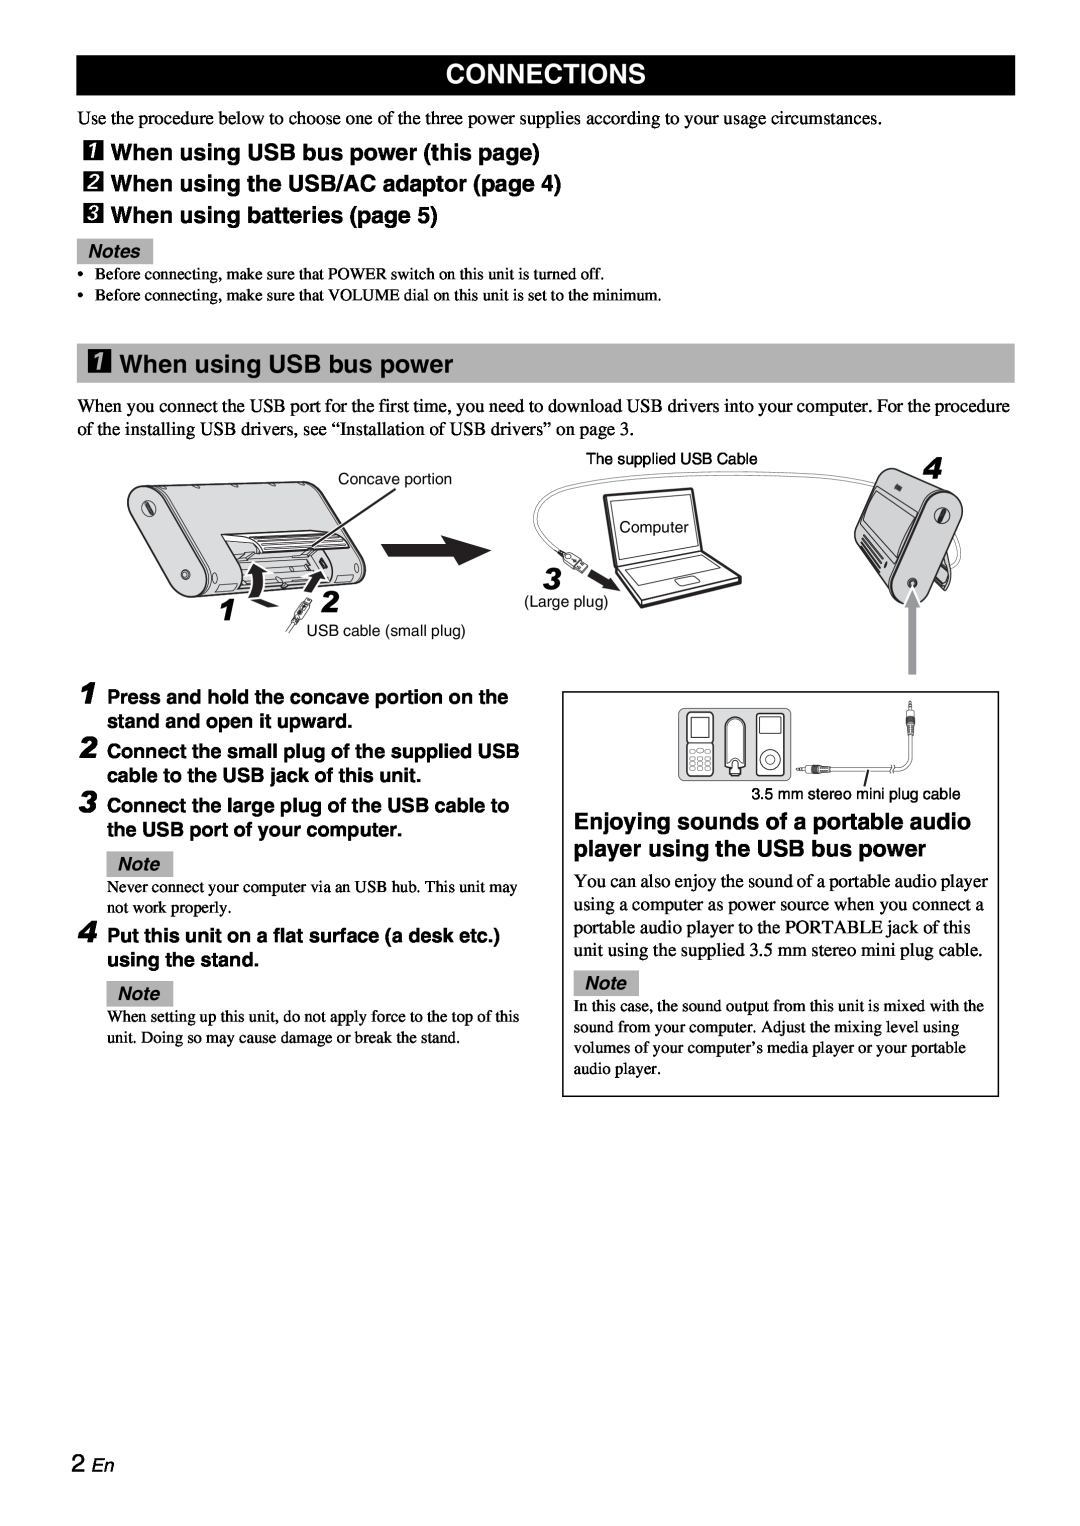 Yamaha NX-U10, Multimedia Speaker owner manual Connections, When using USB bus power this page, 2 En 